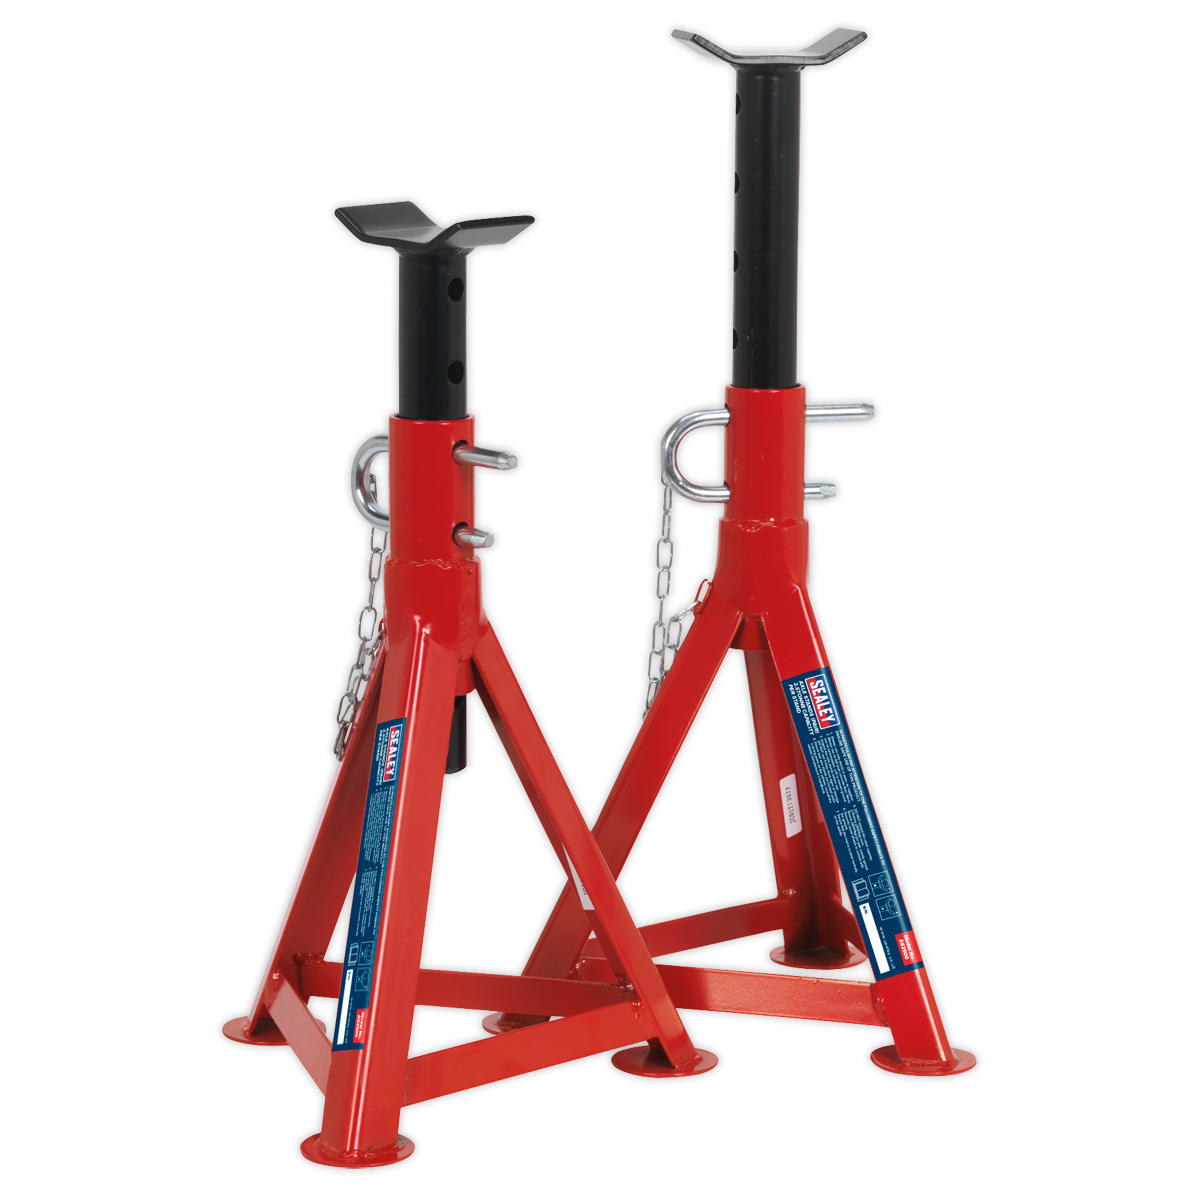 Sealey Axle Stands (Pair) 2.5 Tonne Capacity per Stand